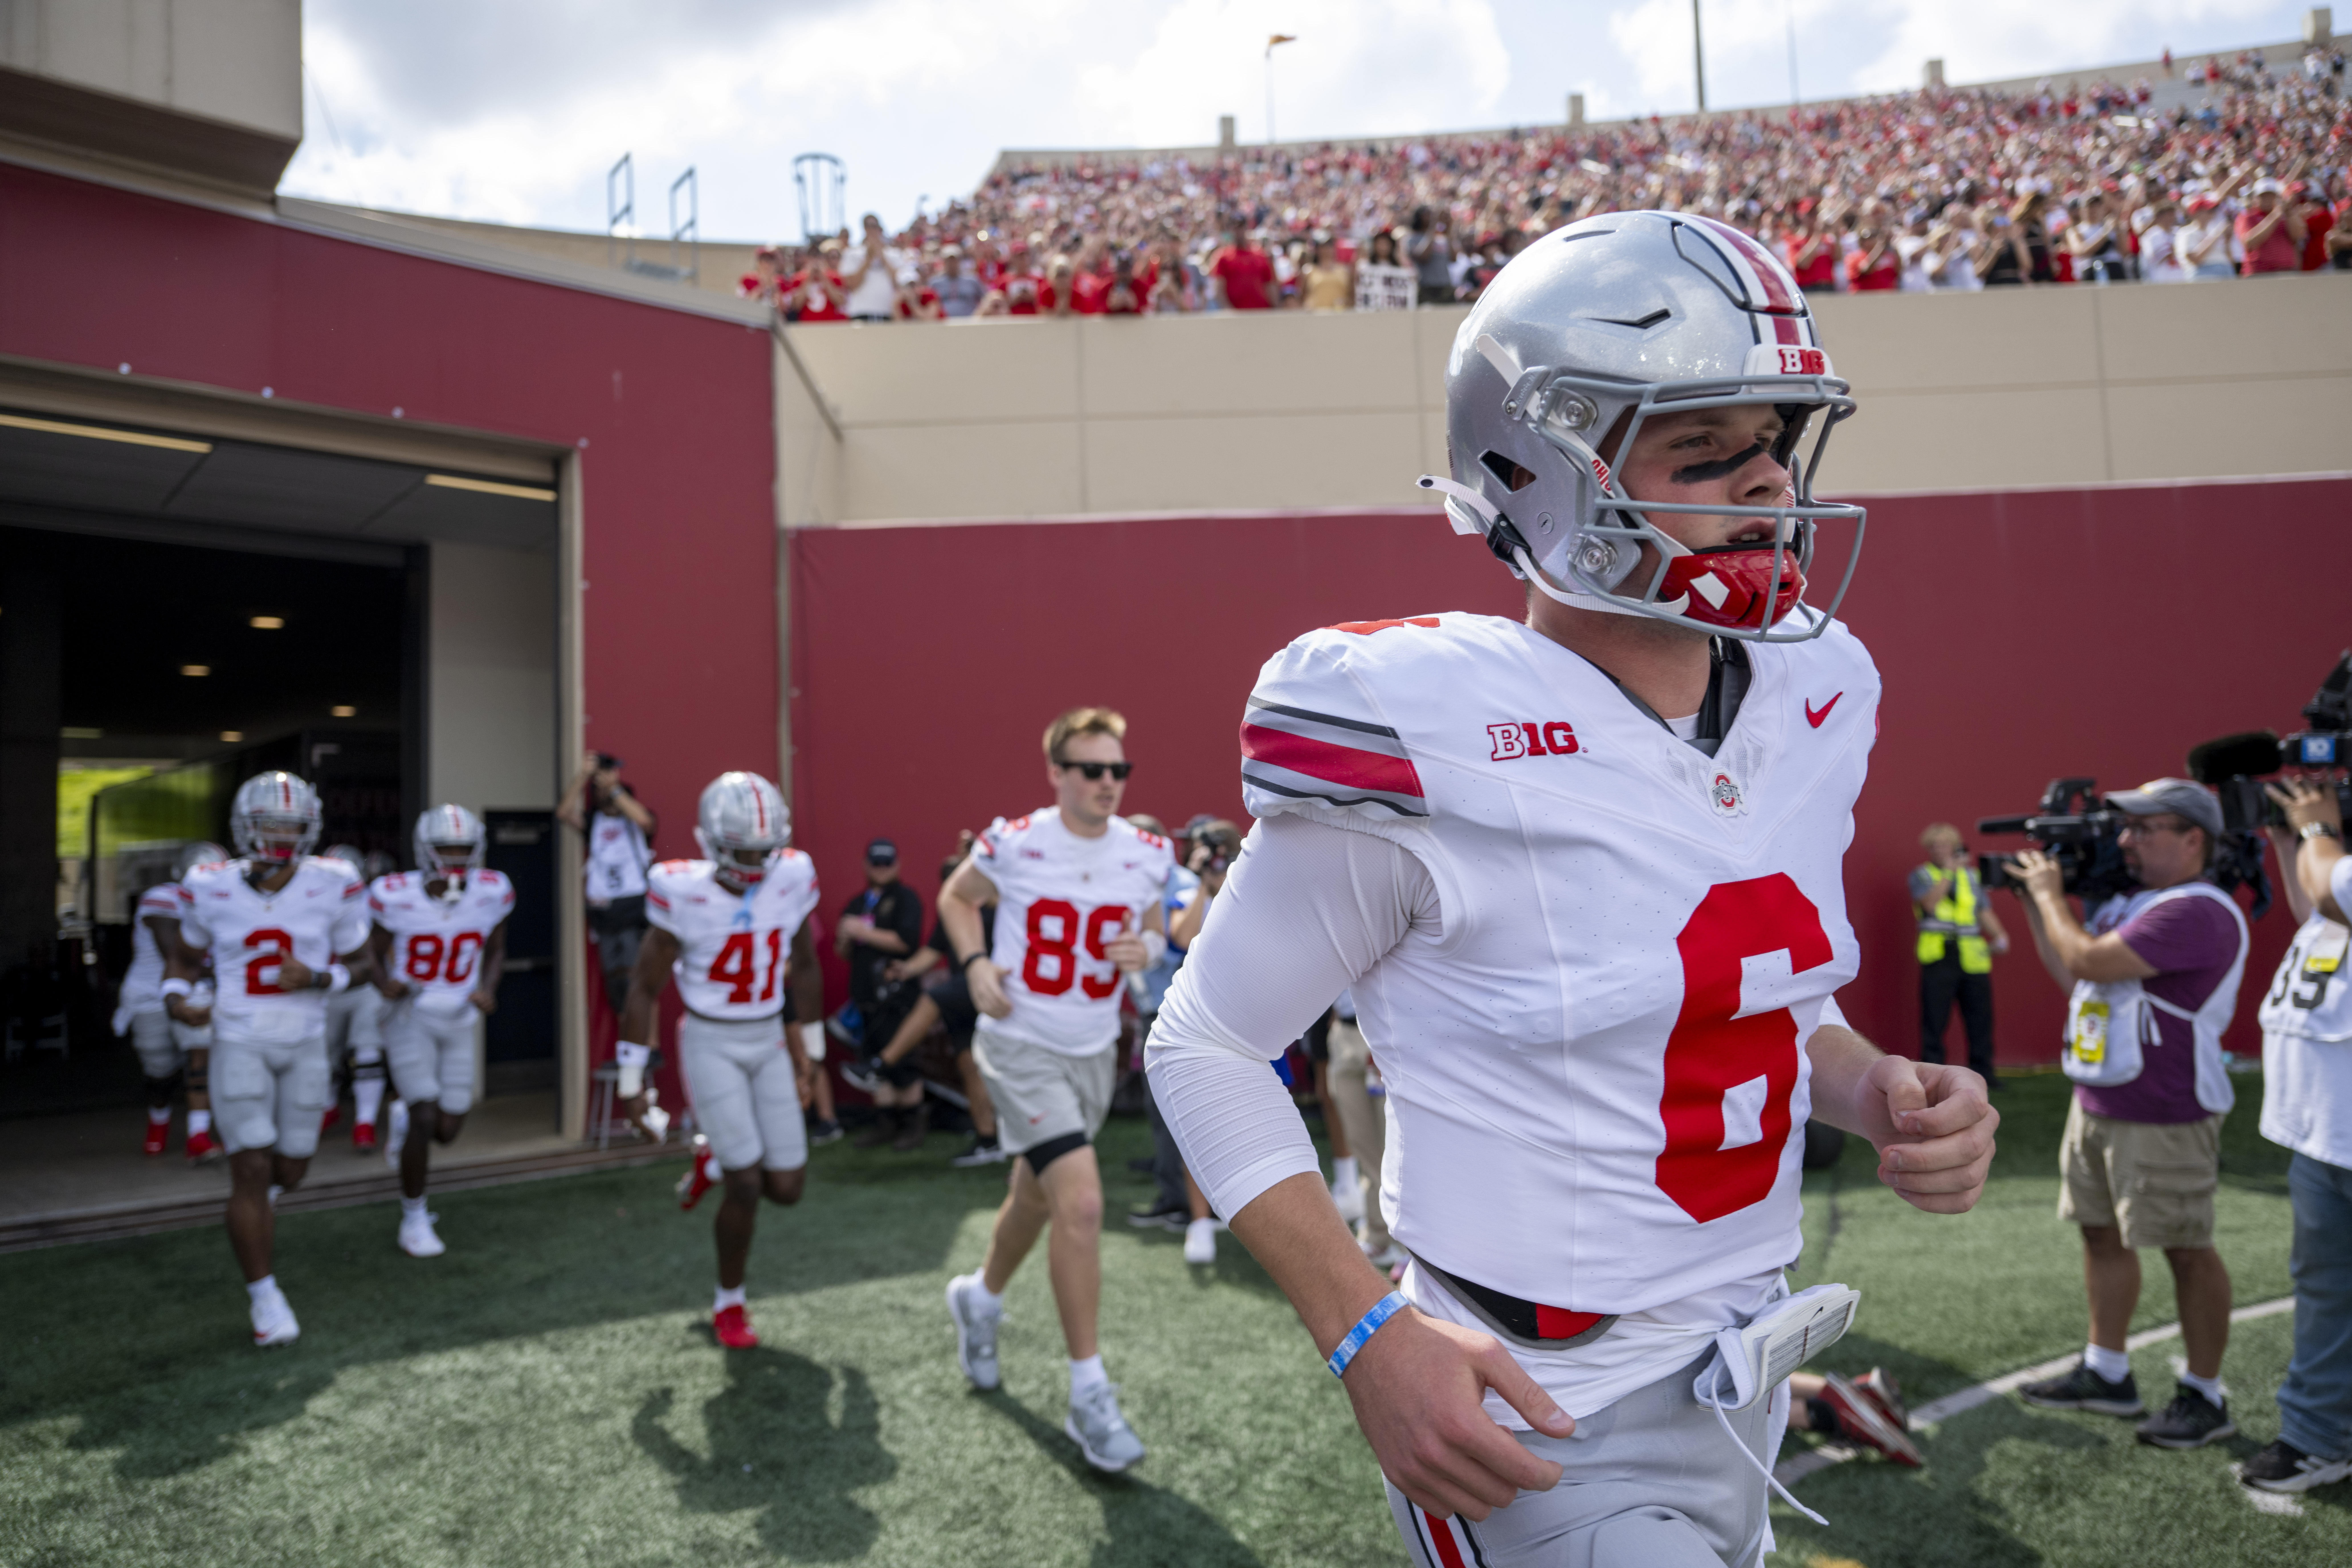 Social media reacts to Ohio State’s Kyle McCord throwing an interception